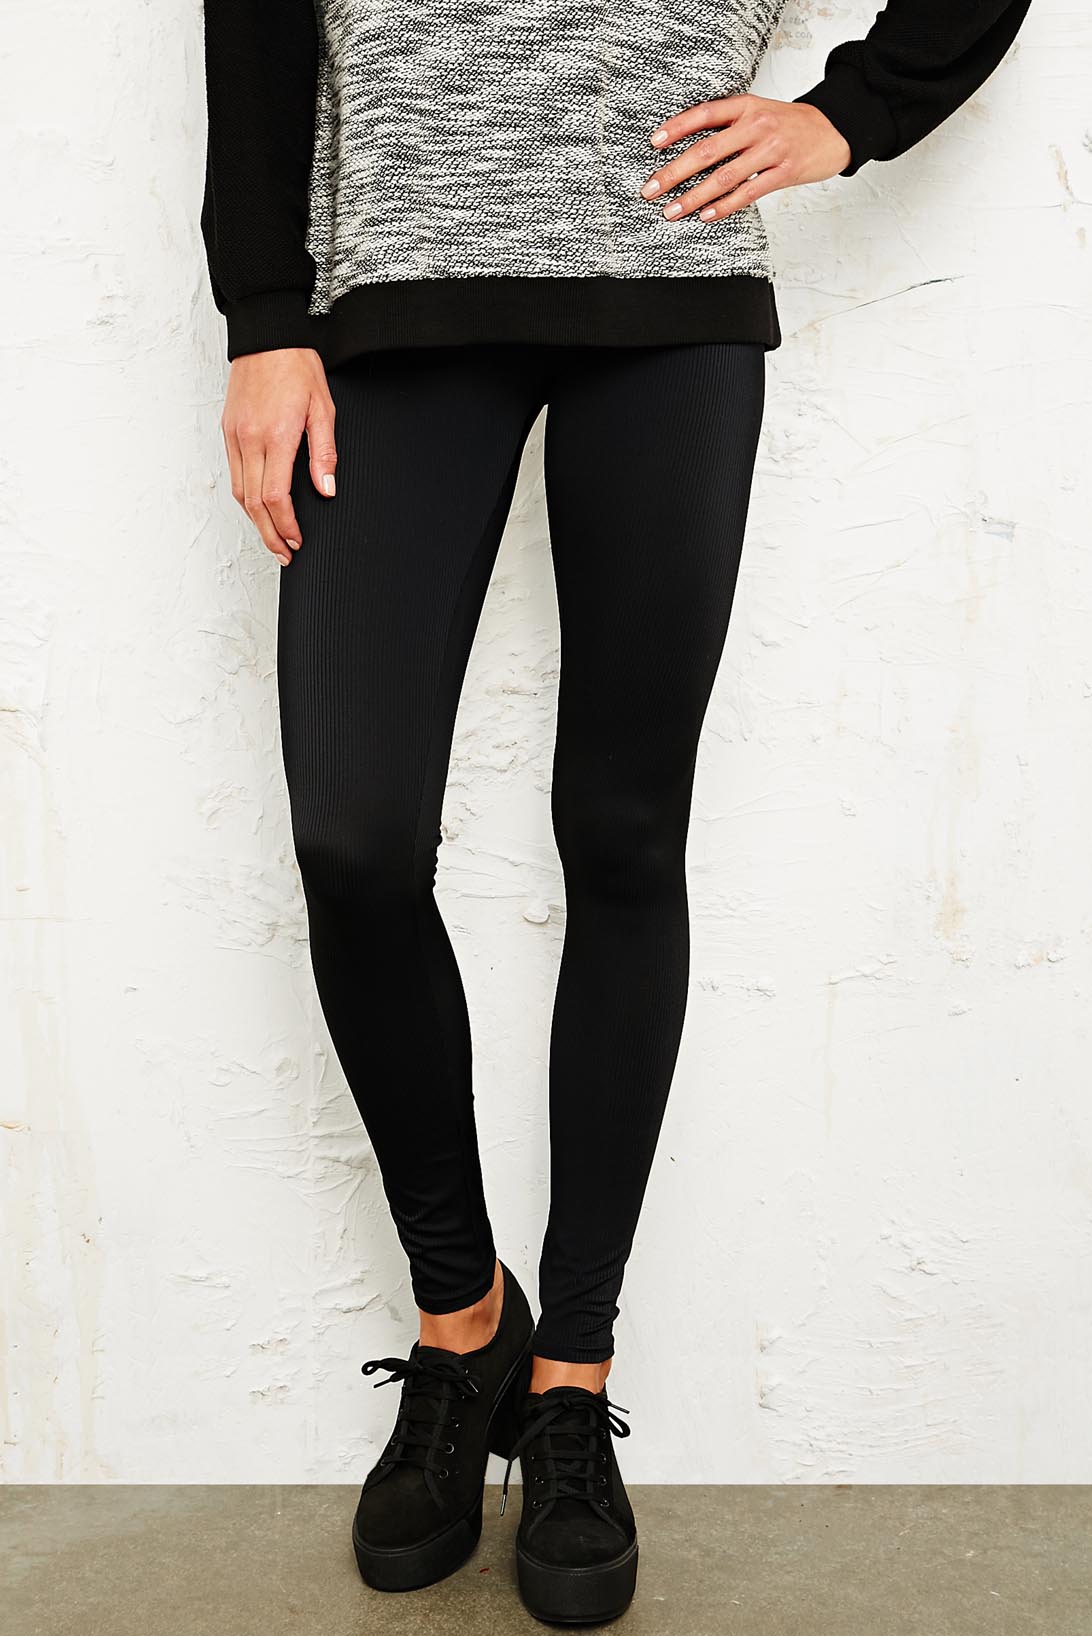 ... about Urban Outfitters Black Ribbed BDG Leggings Shiny BNWT UK M